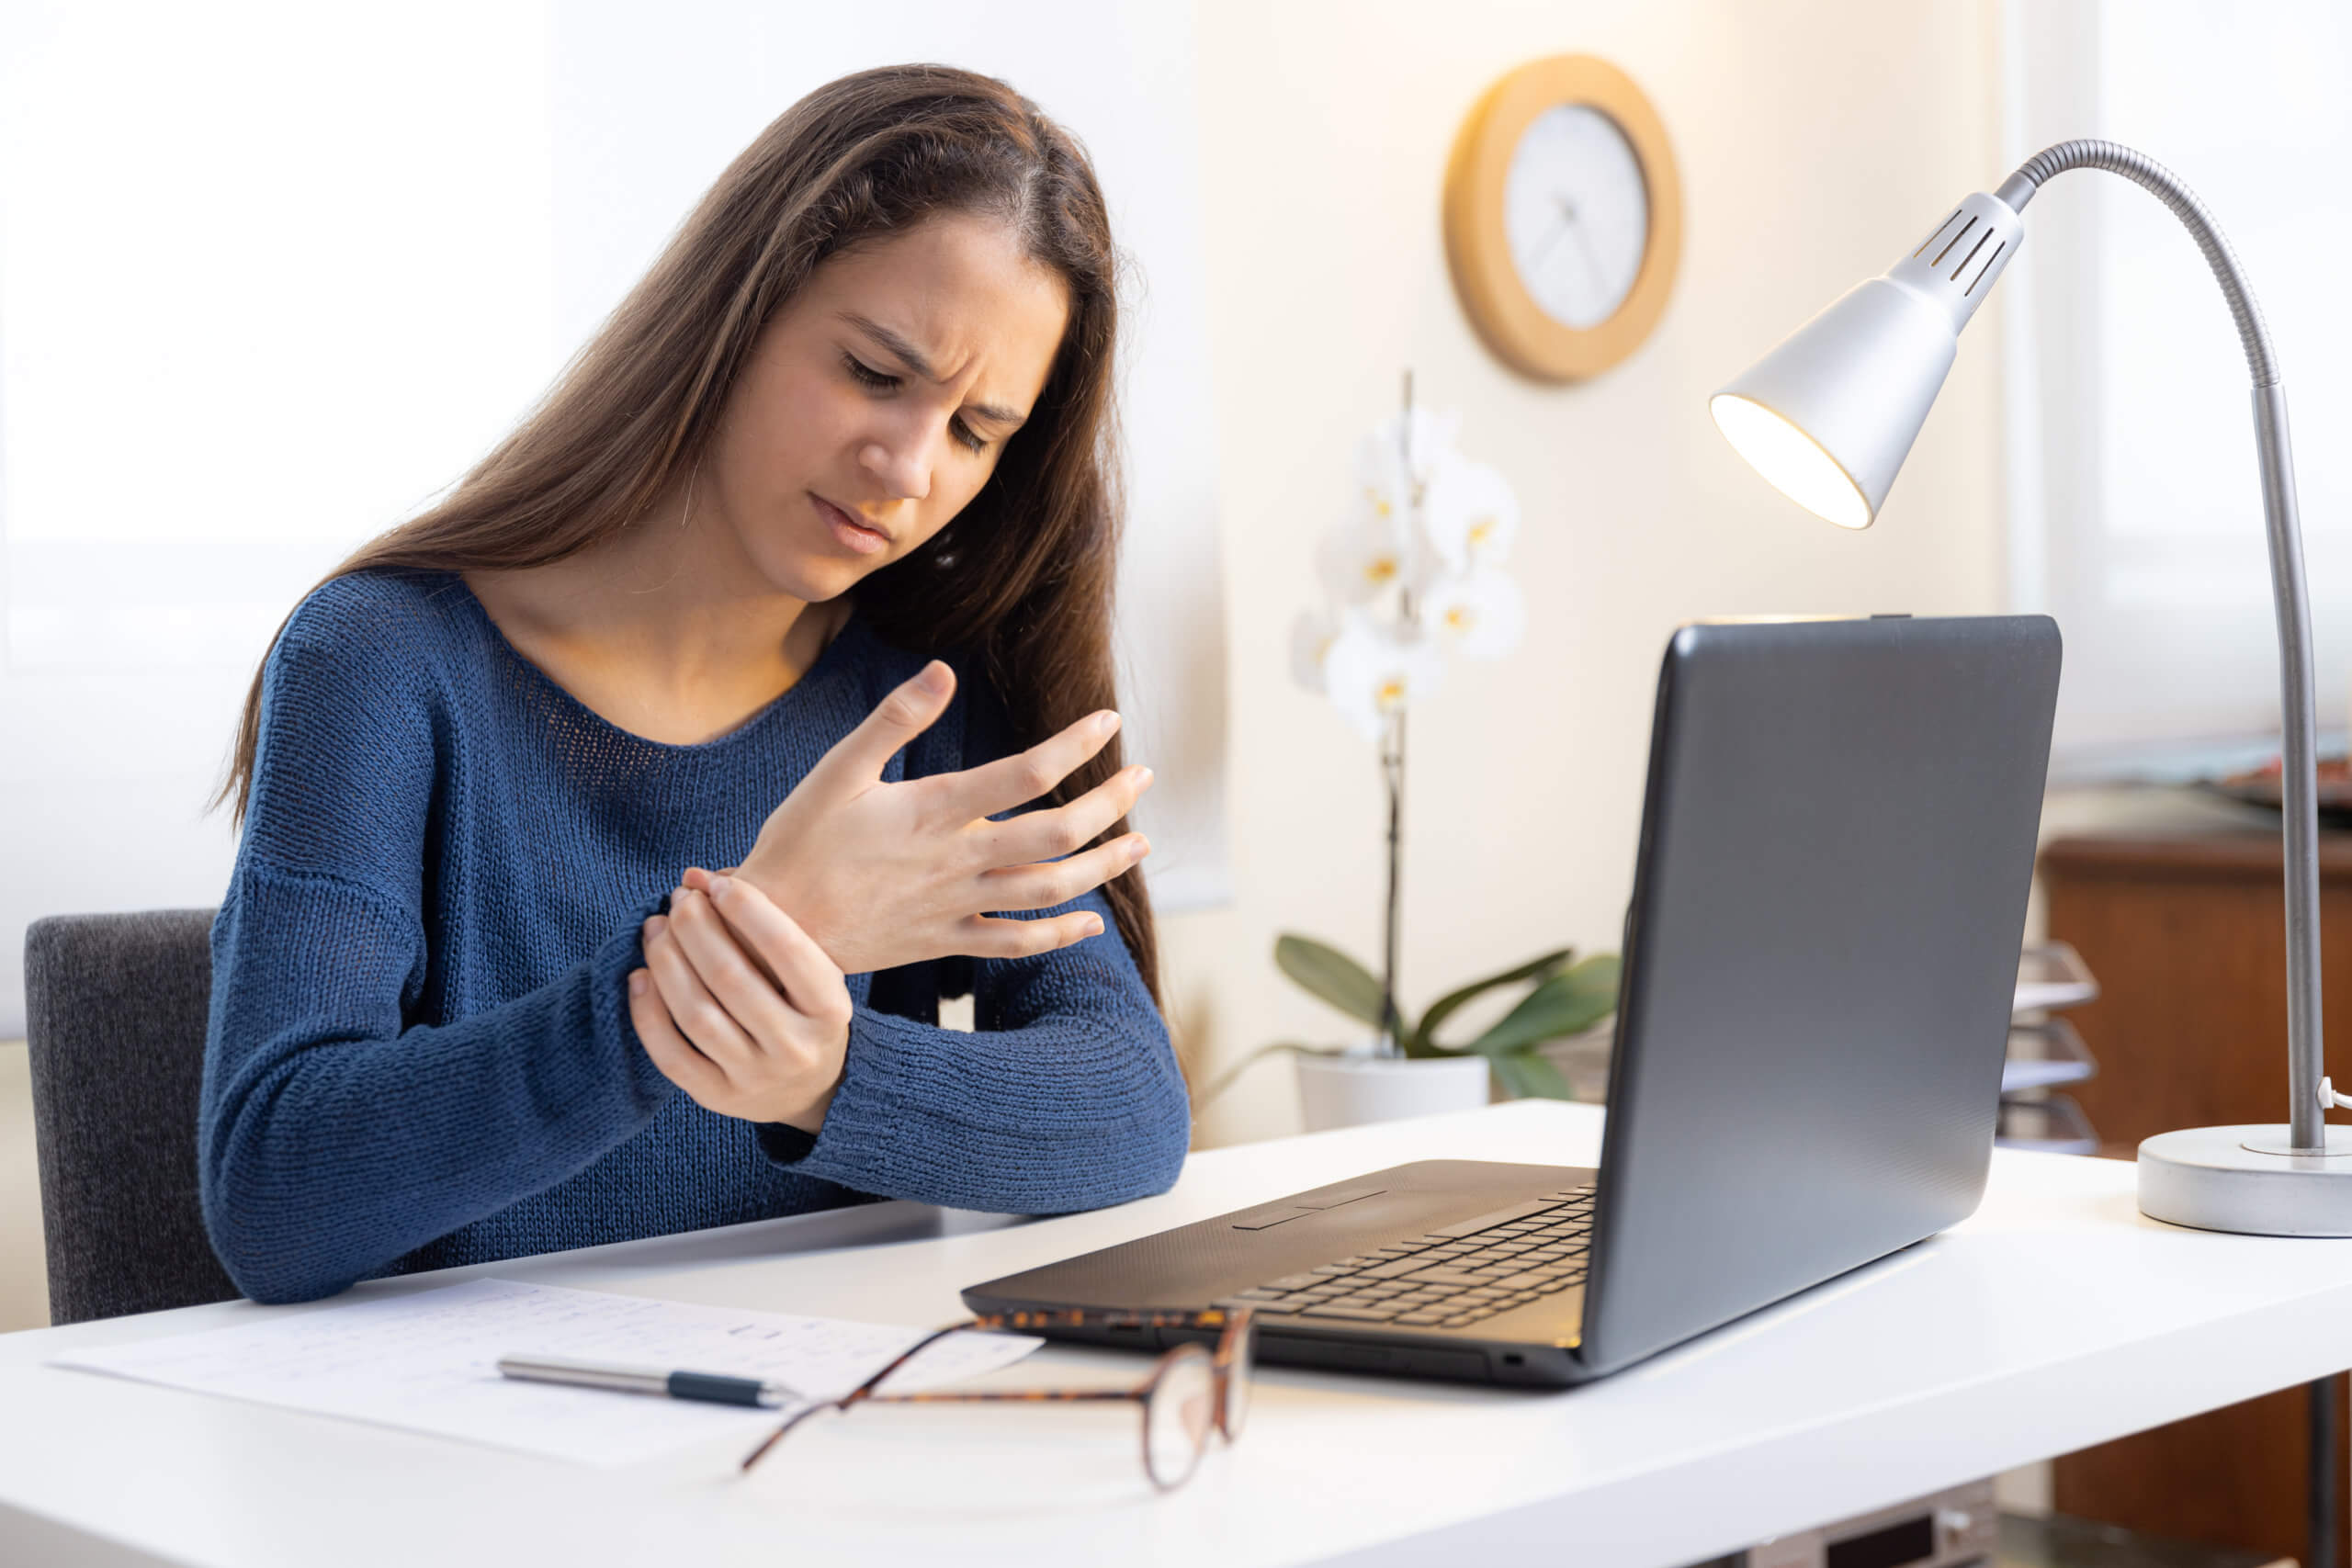 Teen girl working on a laptop holds her wrist and looks in pain due to juvenile arthritis.